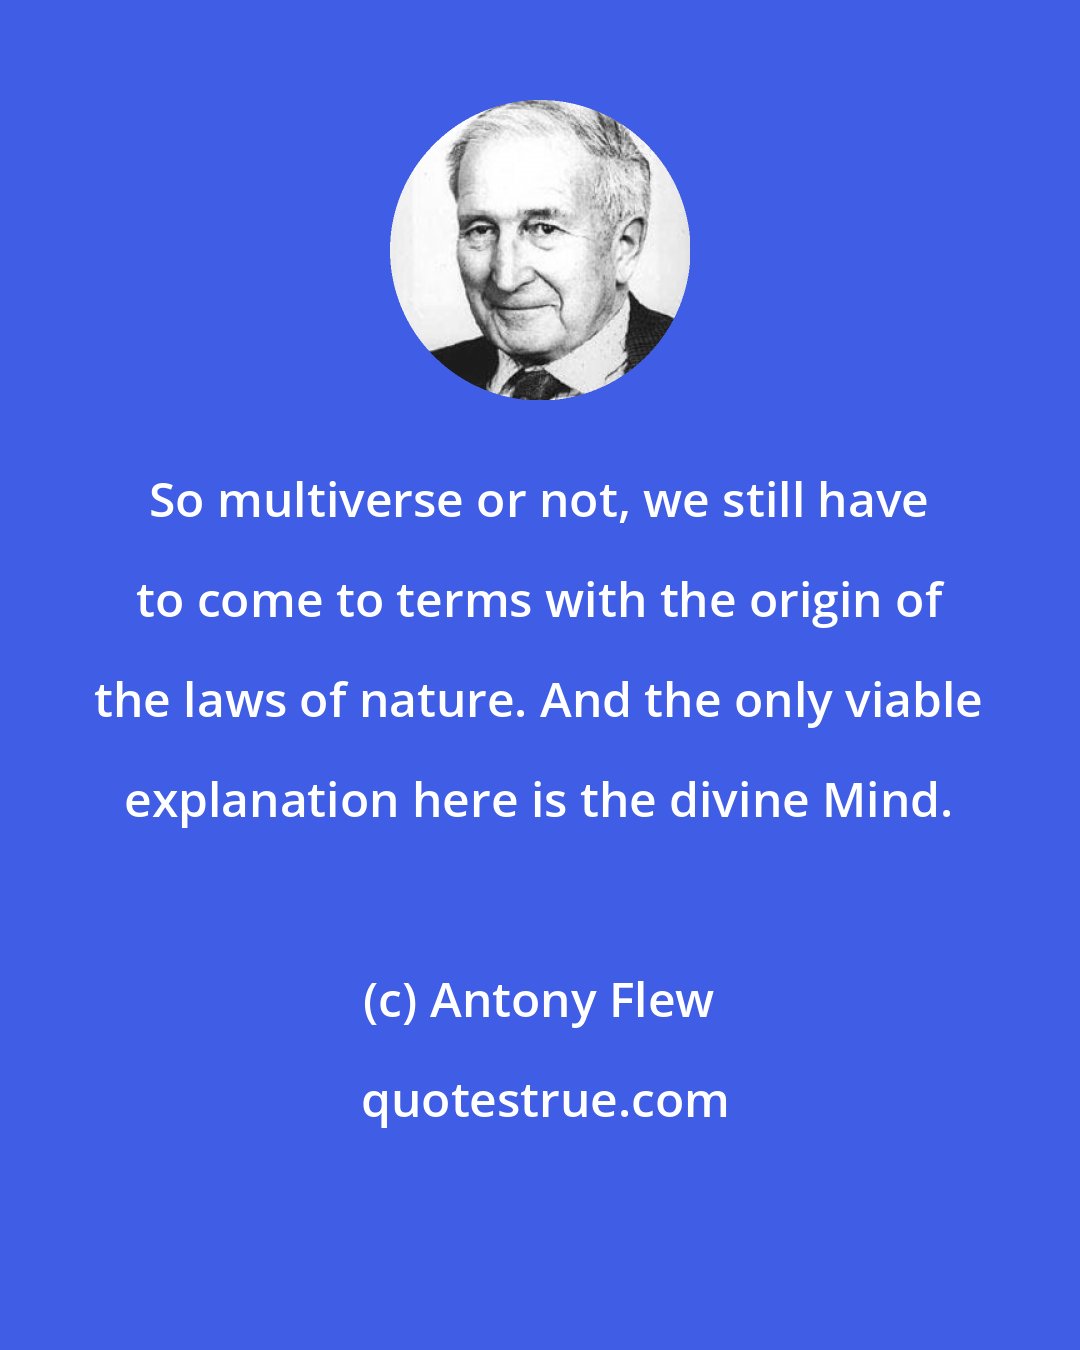 Antony Flew: So multiverse or not, we still have to come to terms with the origin of the laws of nature. And the only viable explanation here is the divine Mind.